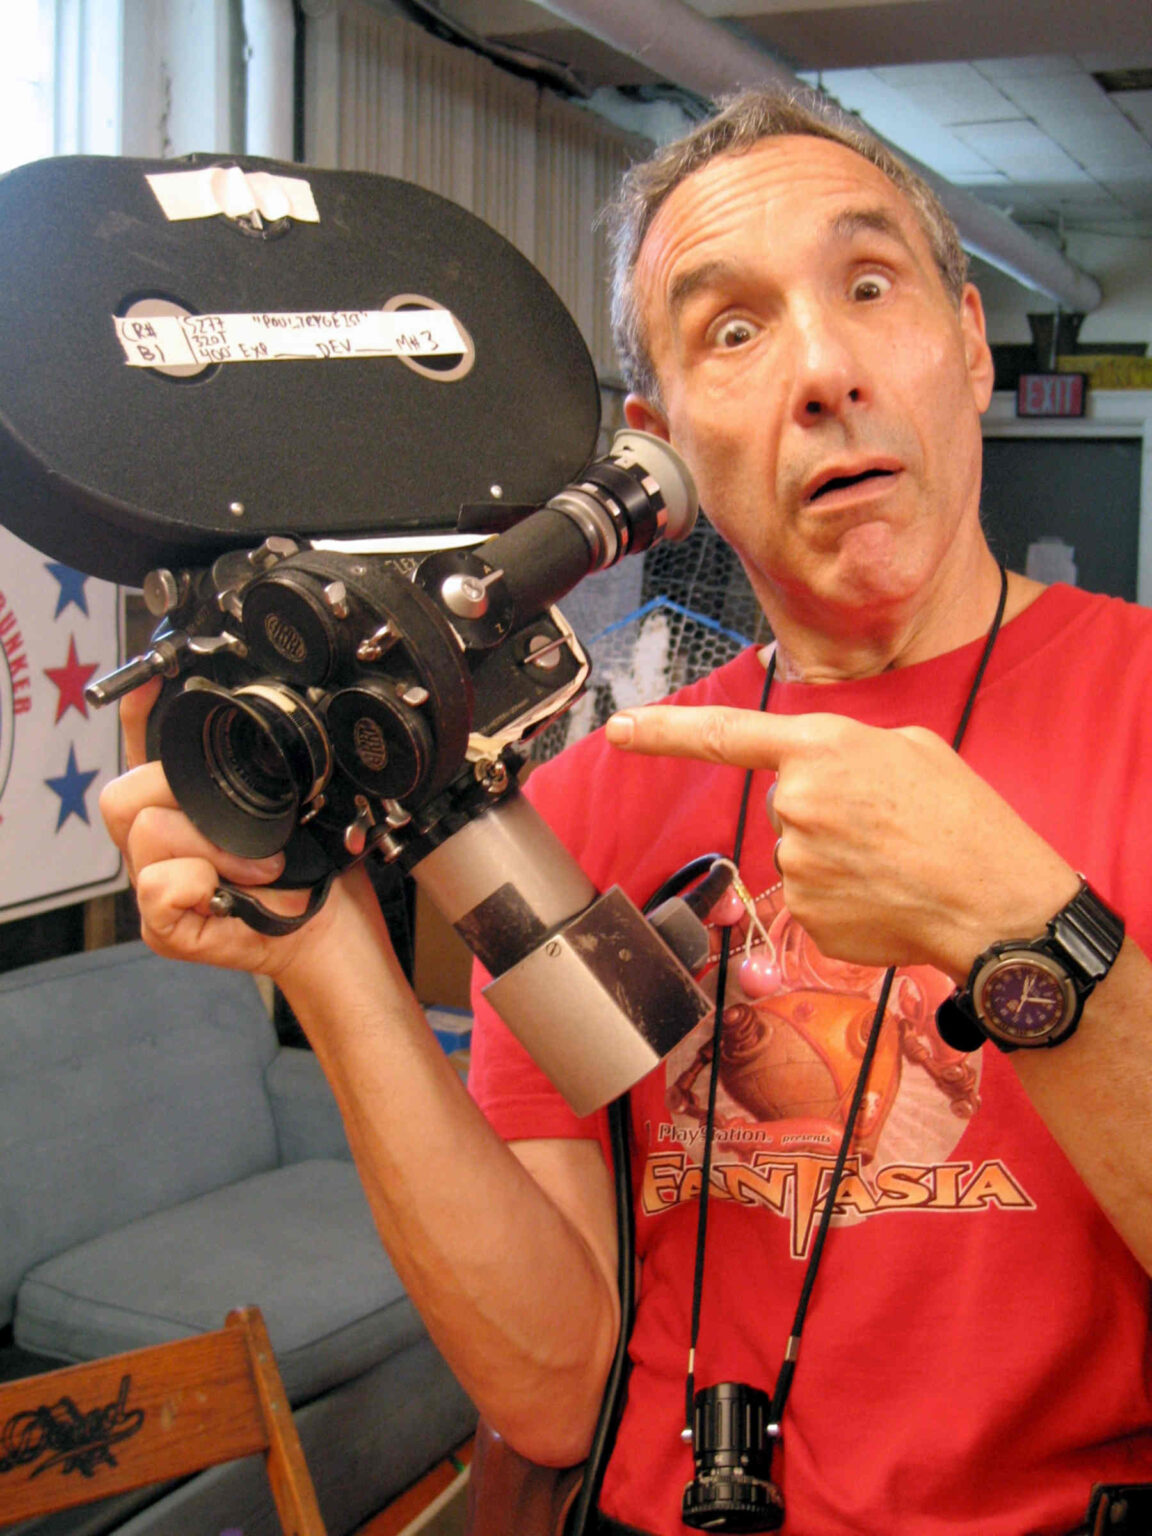 Director Lloyd Kaufman has made a career out of controversy. Get ready for the shock of 'Shakespeare Shitstorm' that is his final swan song!